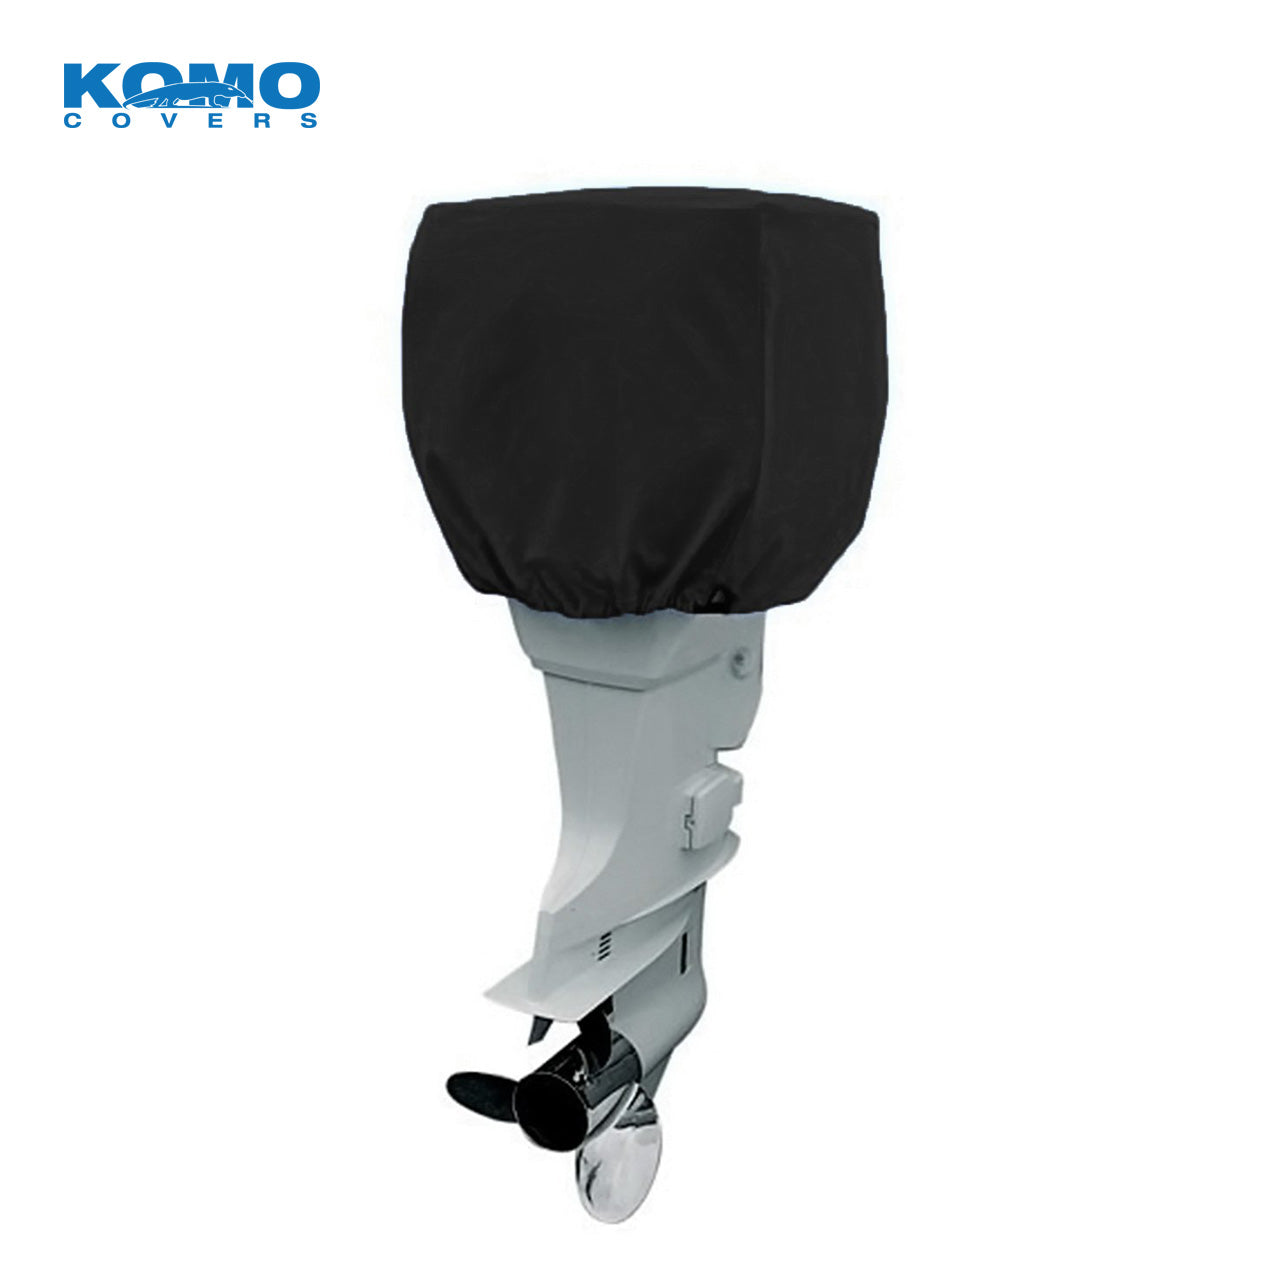 Outboard Motor Cover - Black